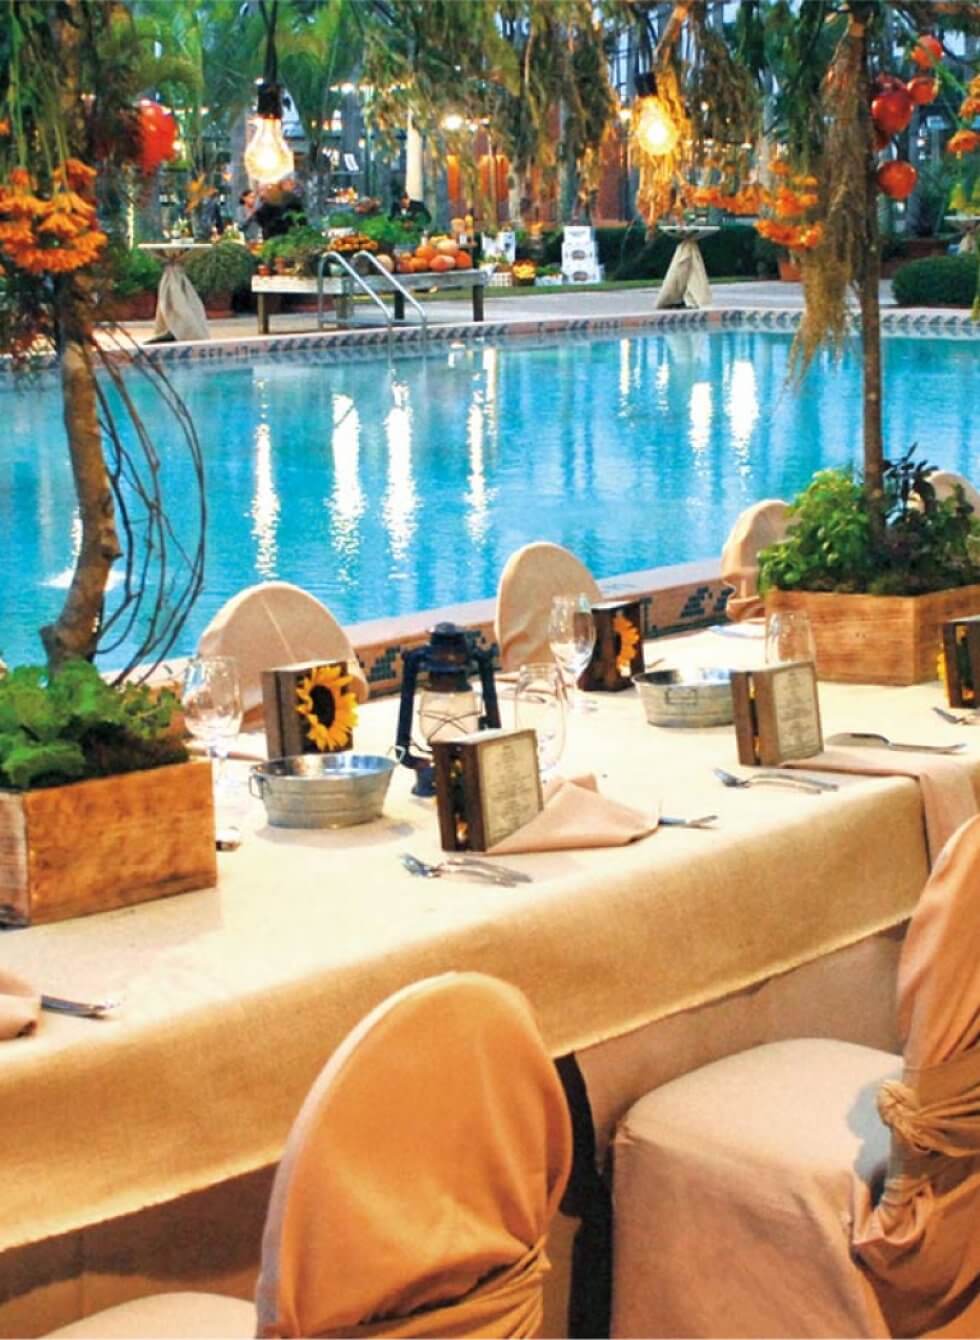 Tables and Chairs Set for a Dinner Event by the Pool